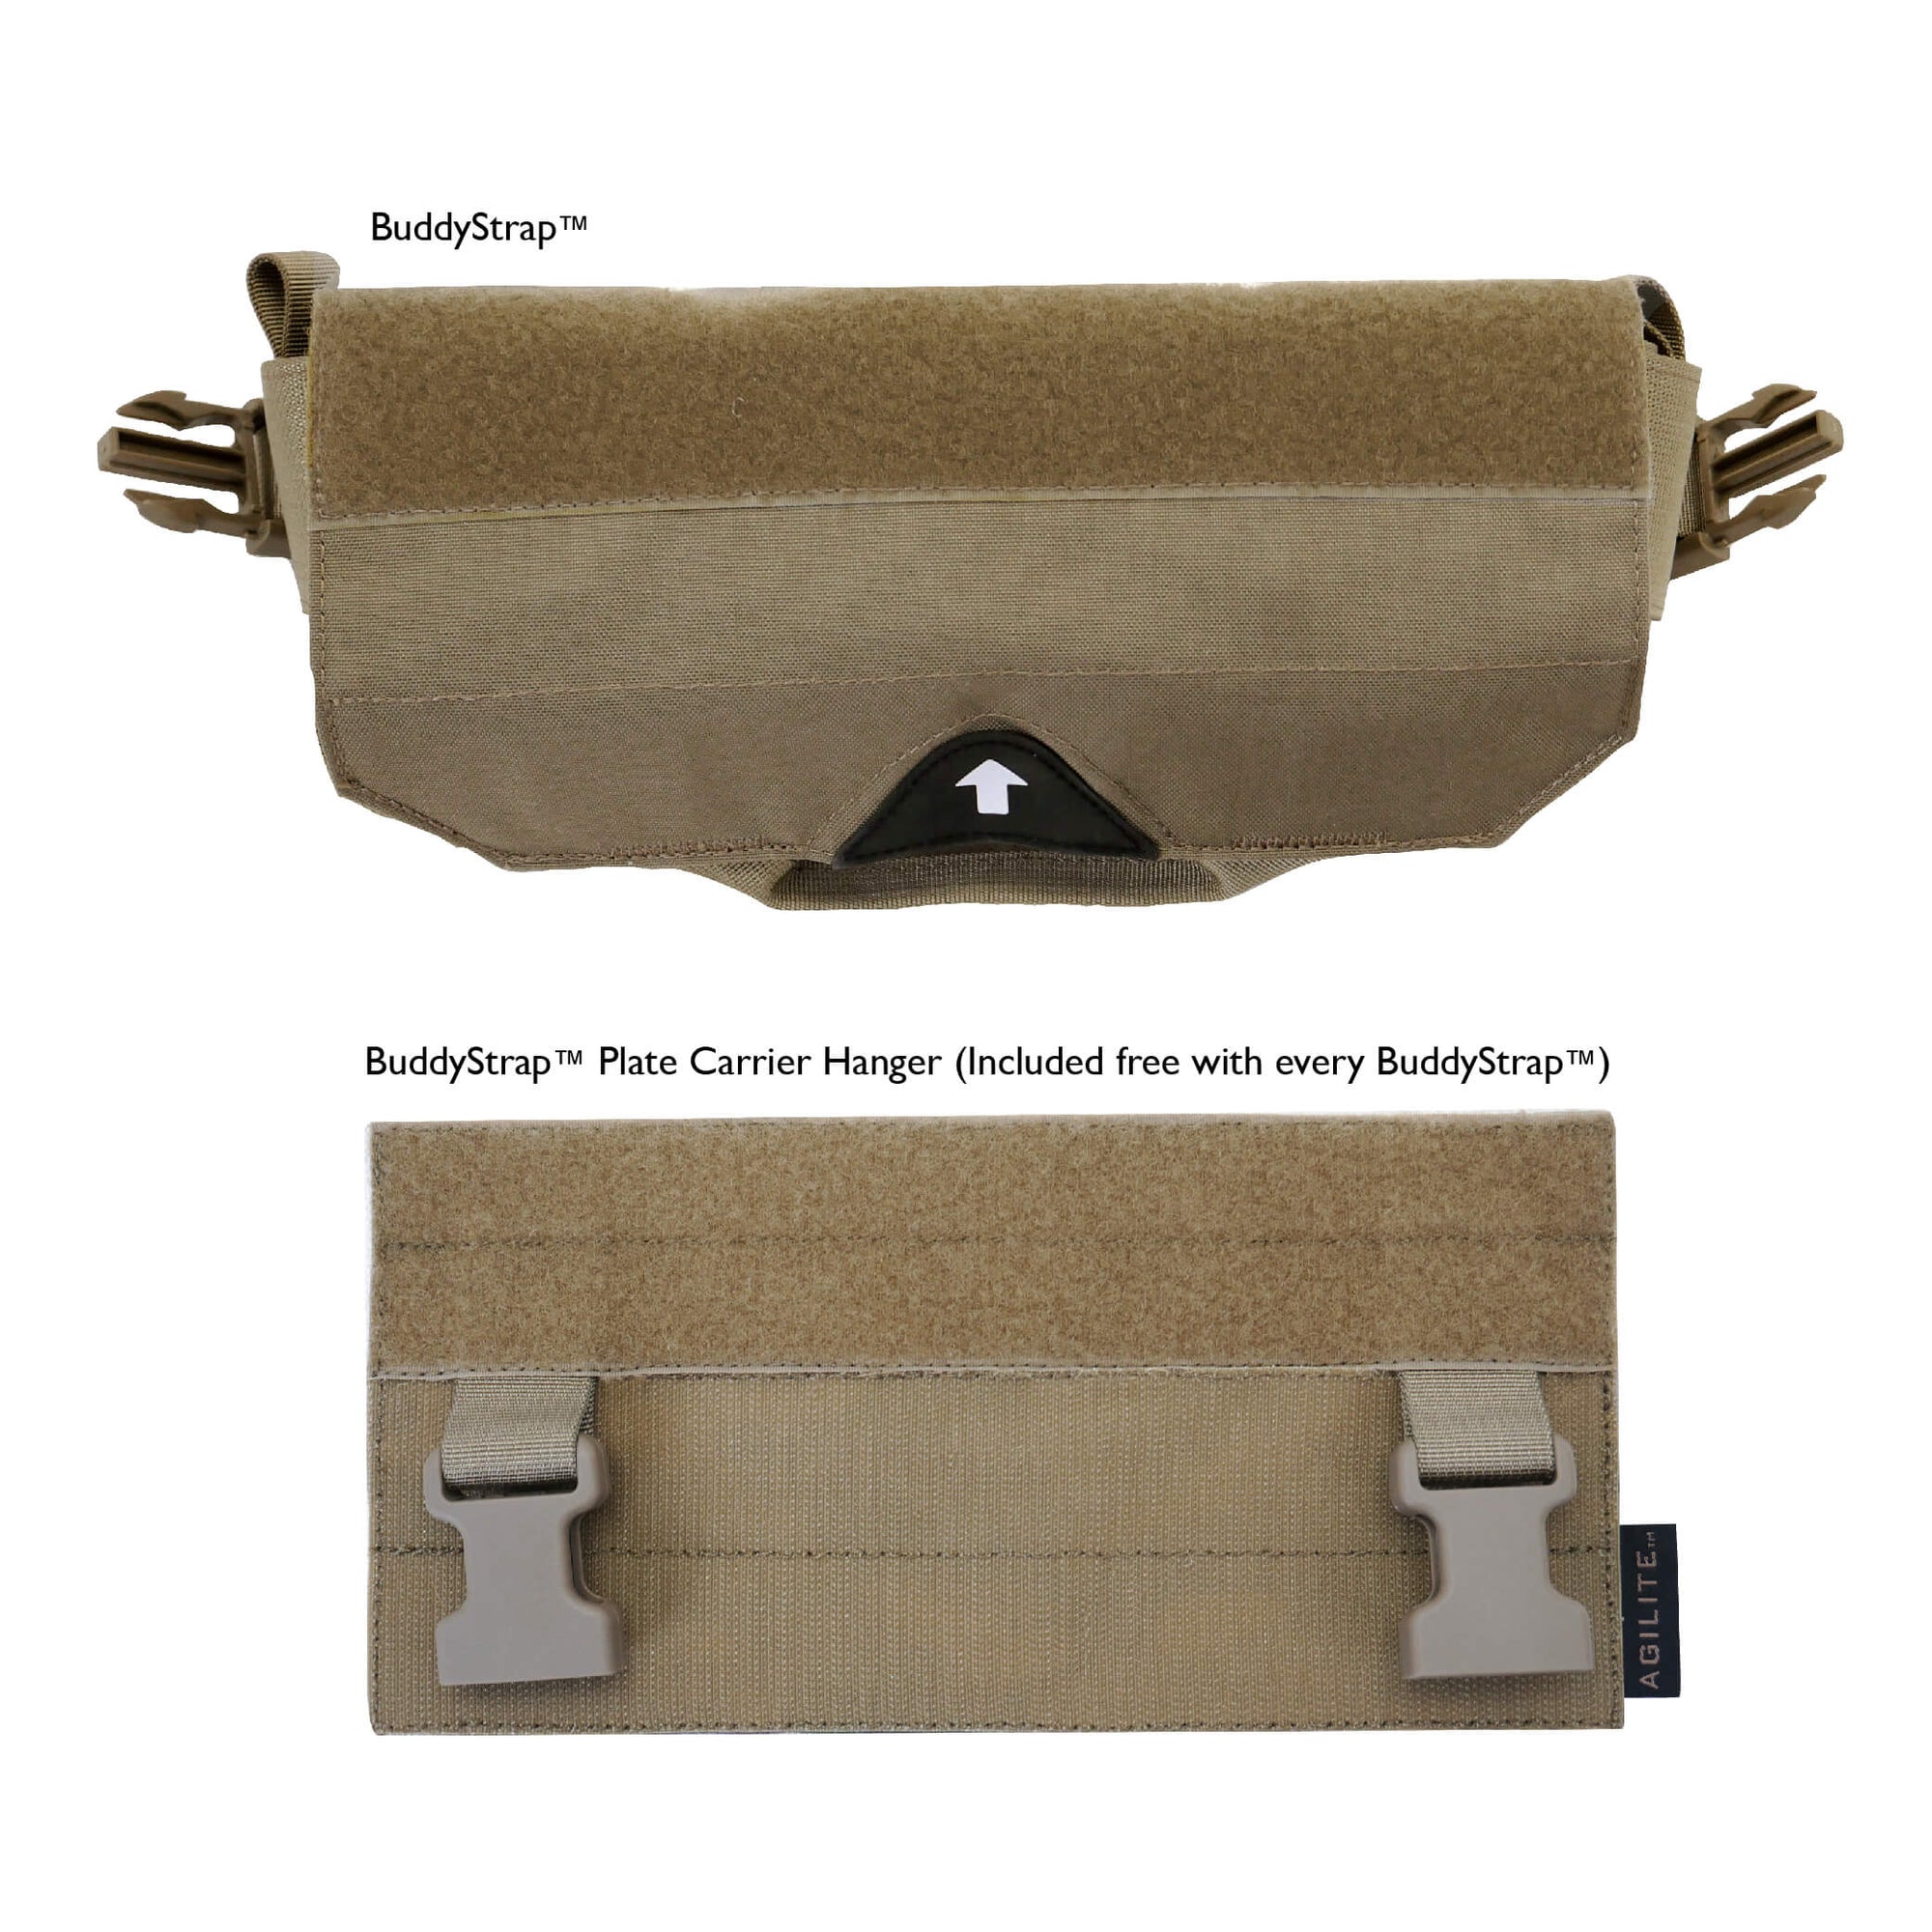 BuddyStrap™ Injured Person Carrier (7859300761852)